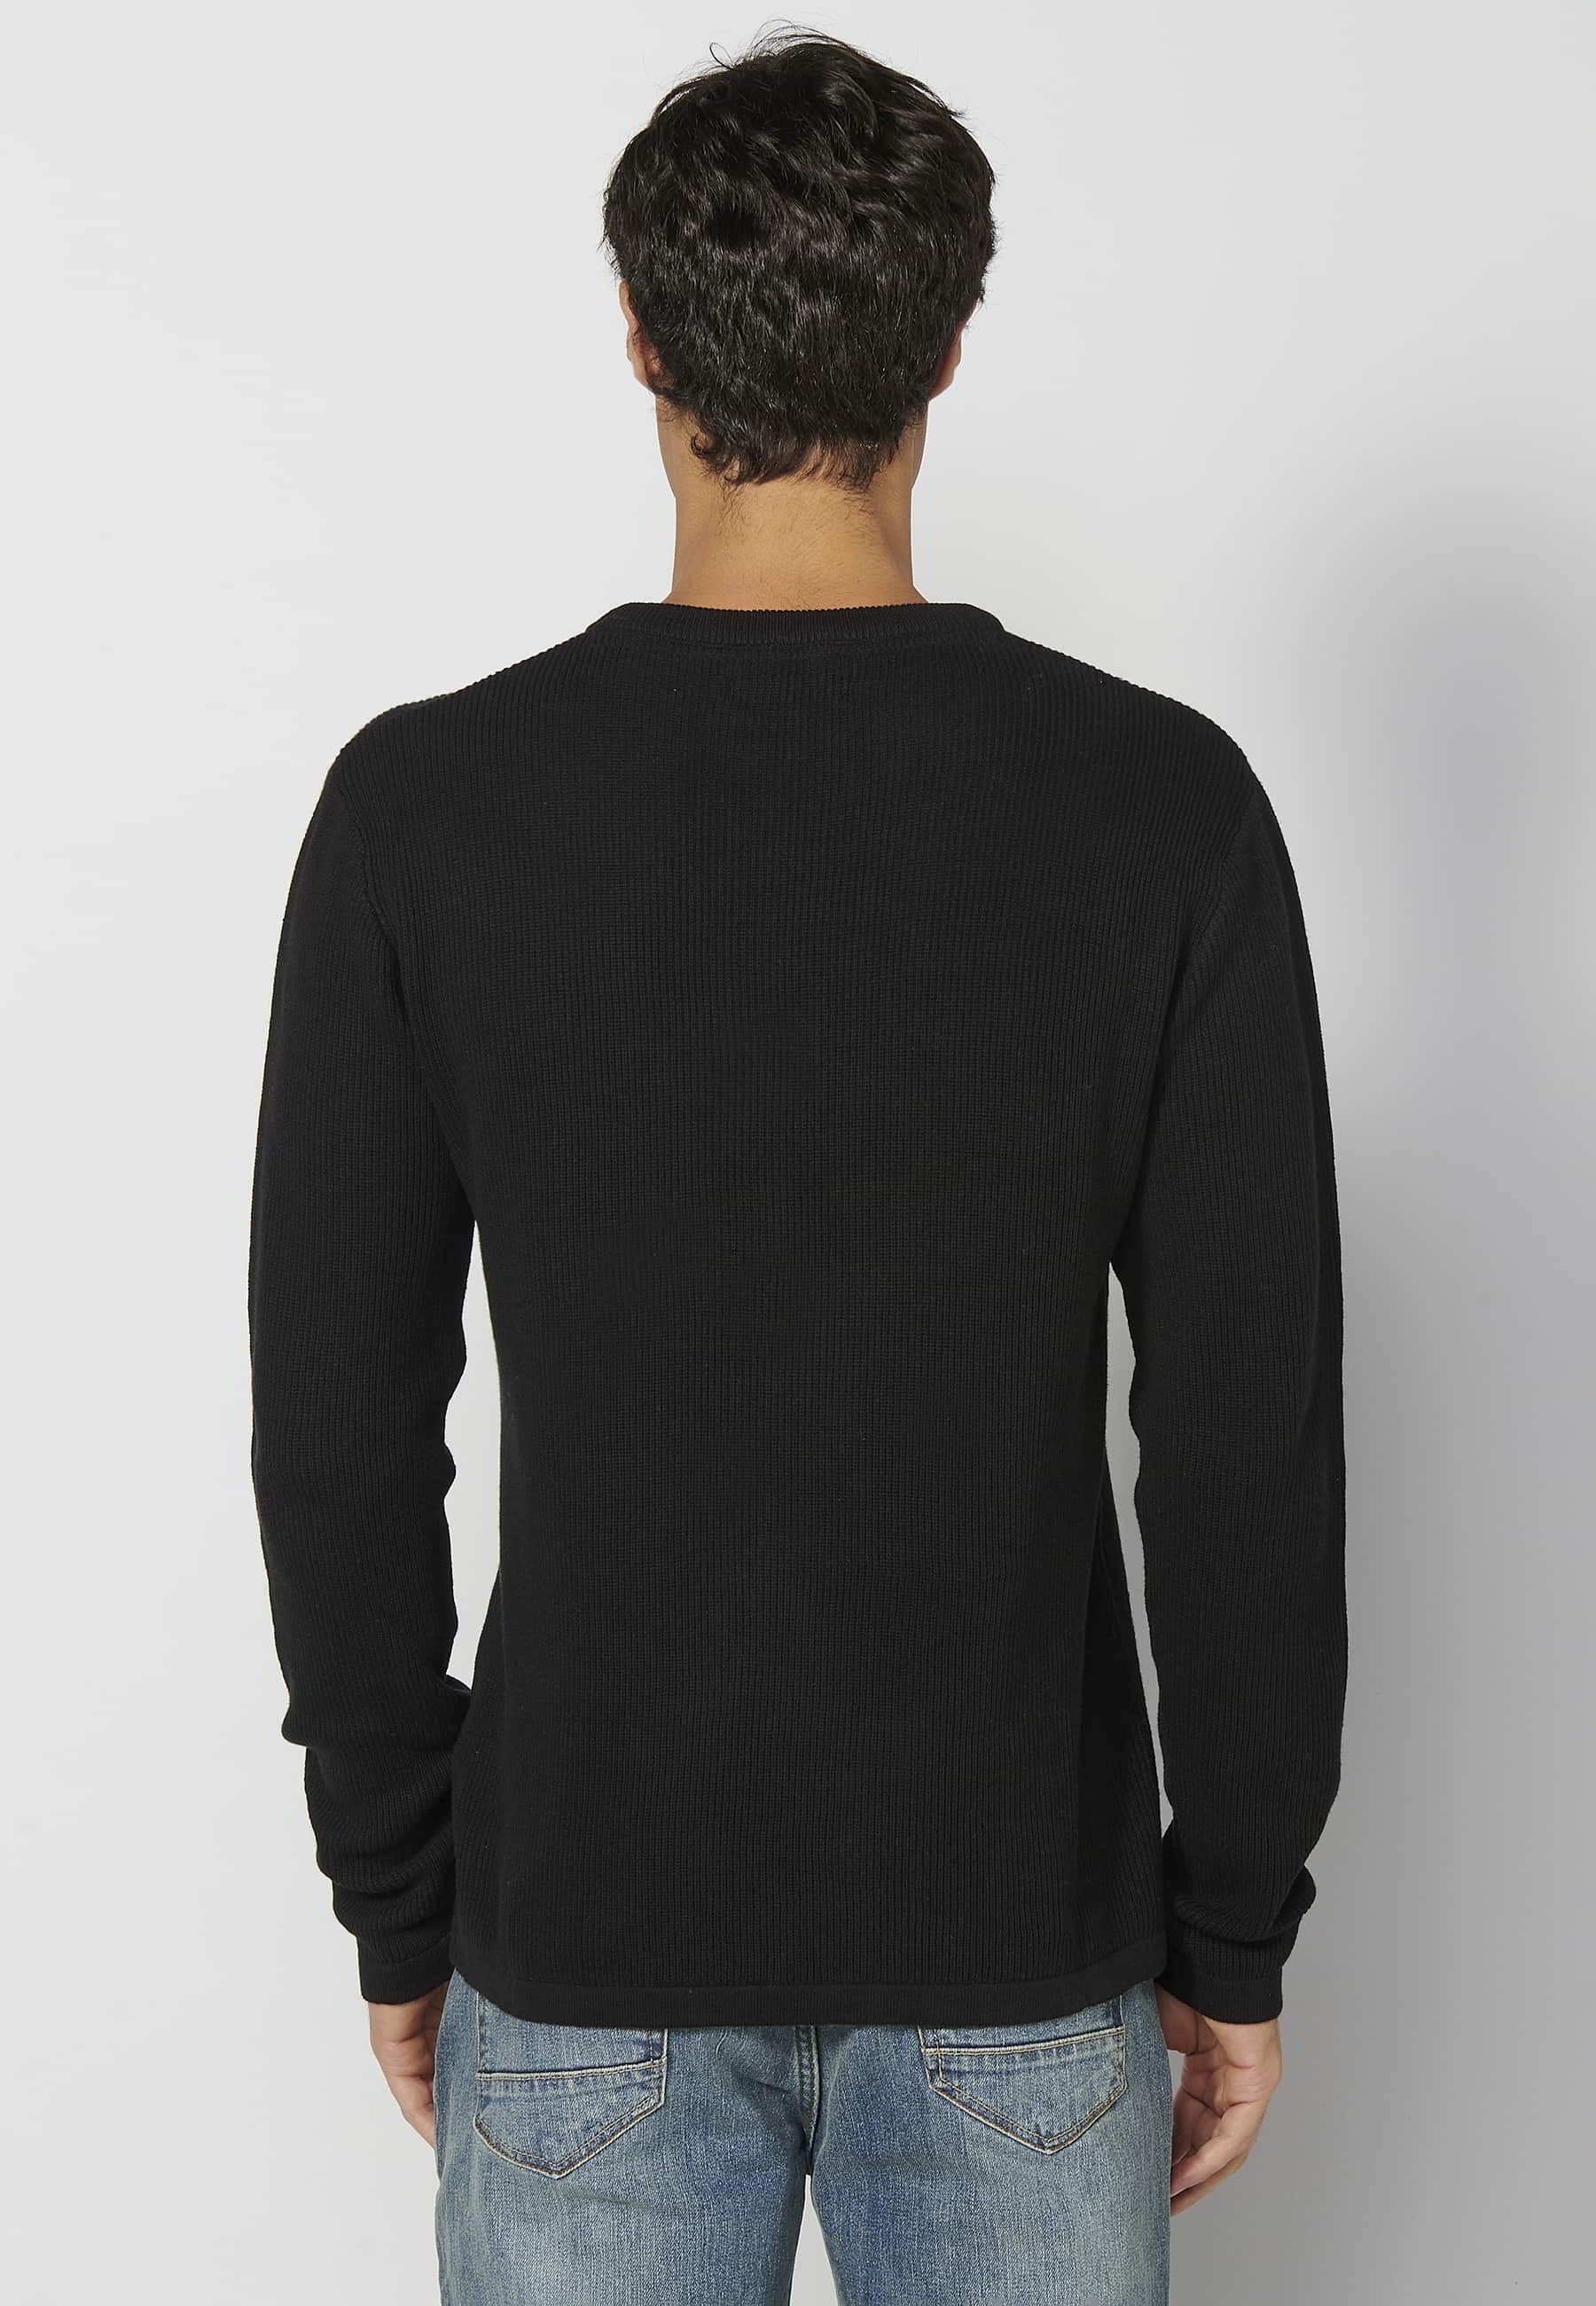 Long sleeve cotton tricot sweater with embroidered detail in black for Men